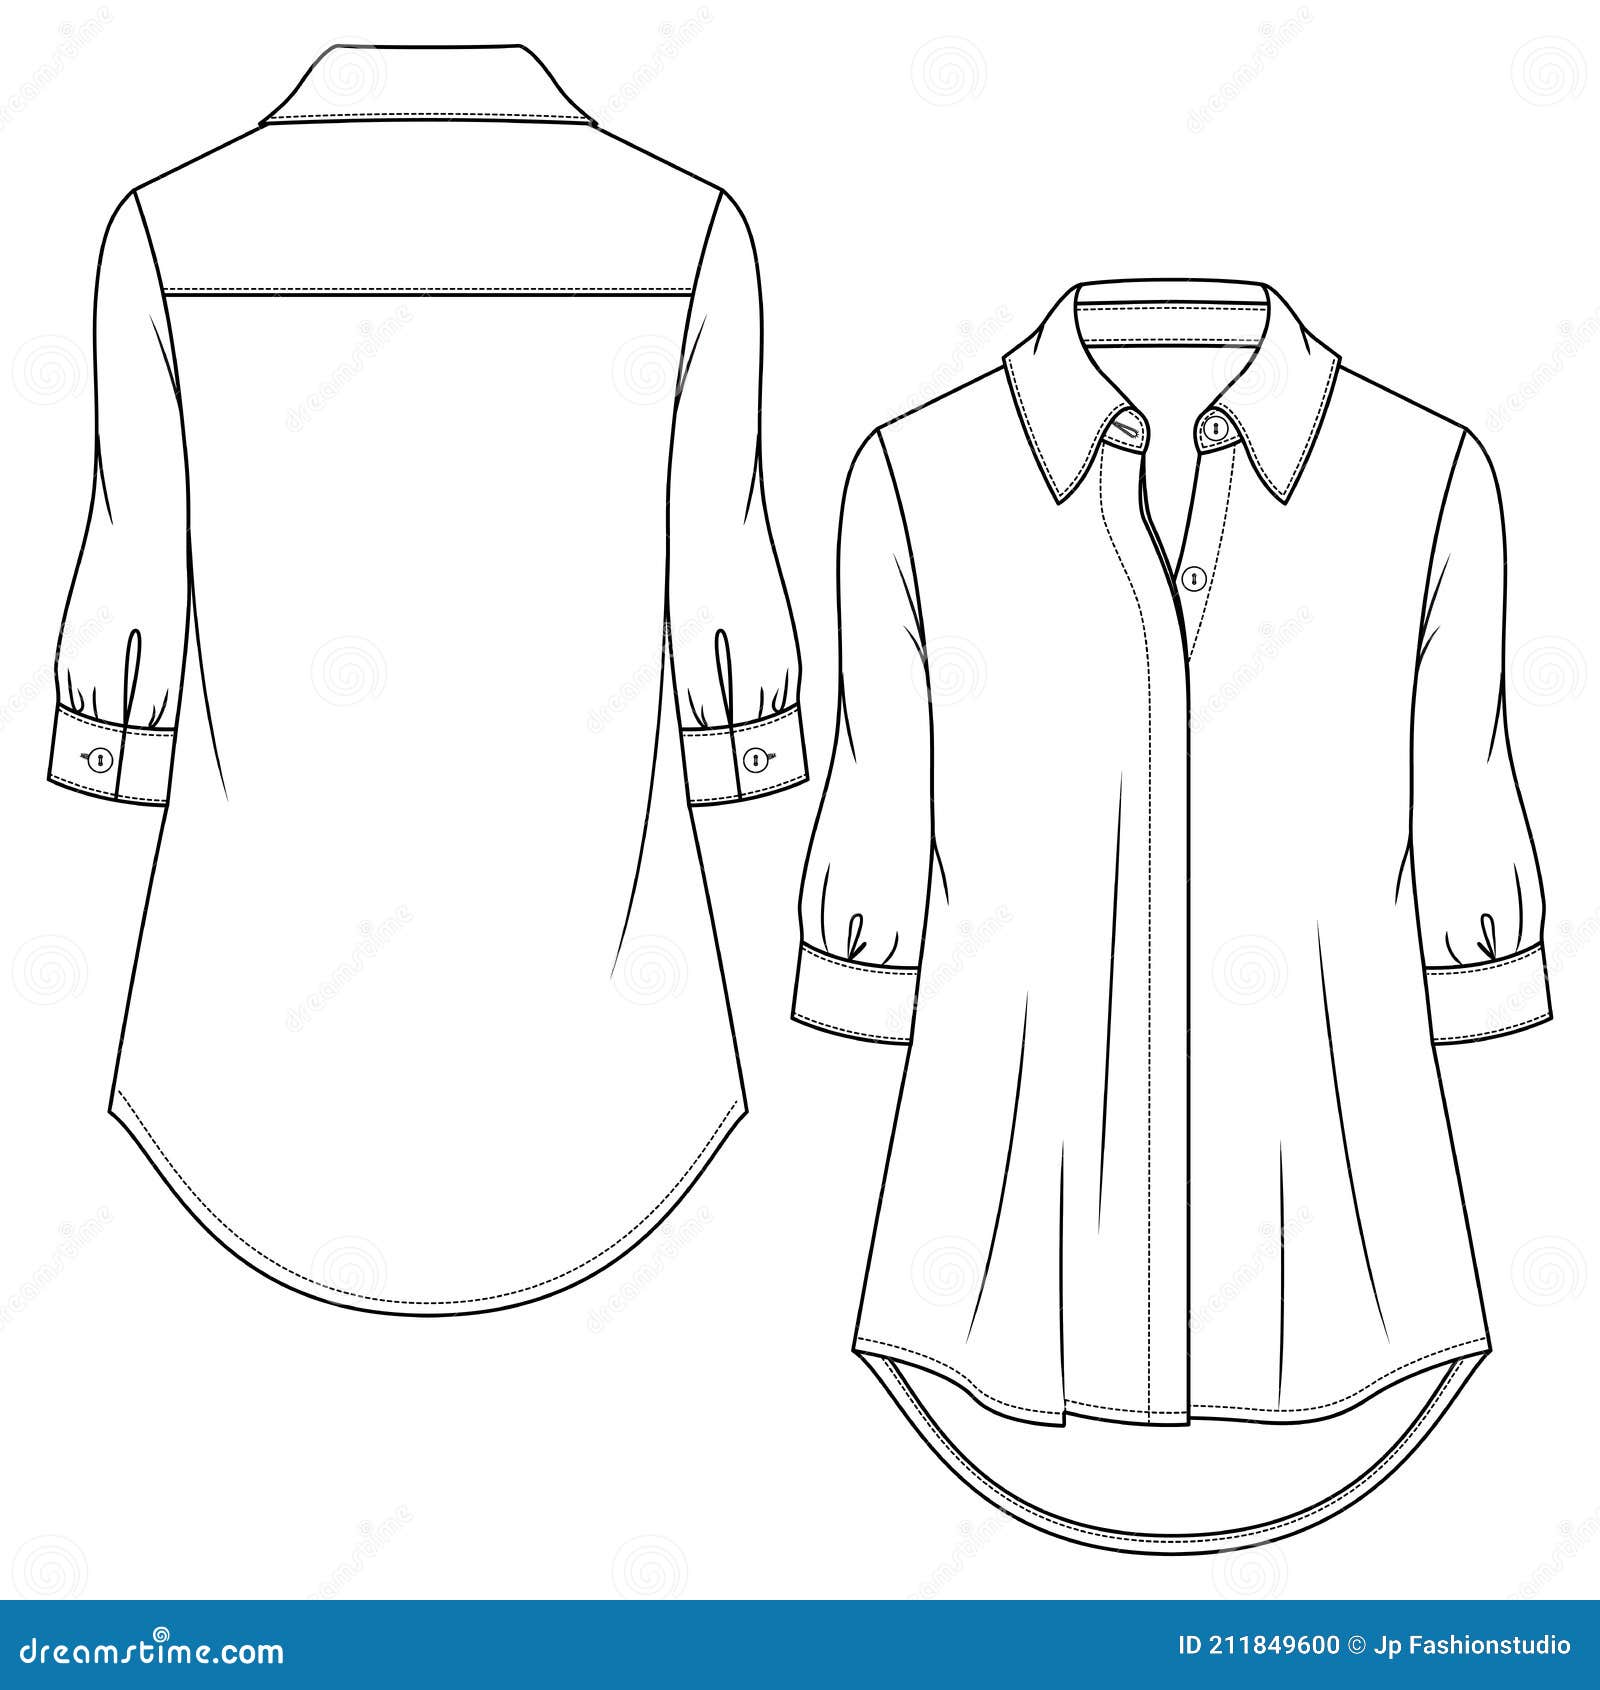 Women Blouse Fashion Flat Sketch Template. Technical Fashion Illustration  Stock Vector - Illustration of clothing, placket: 211849600